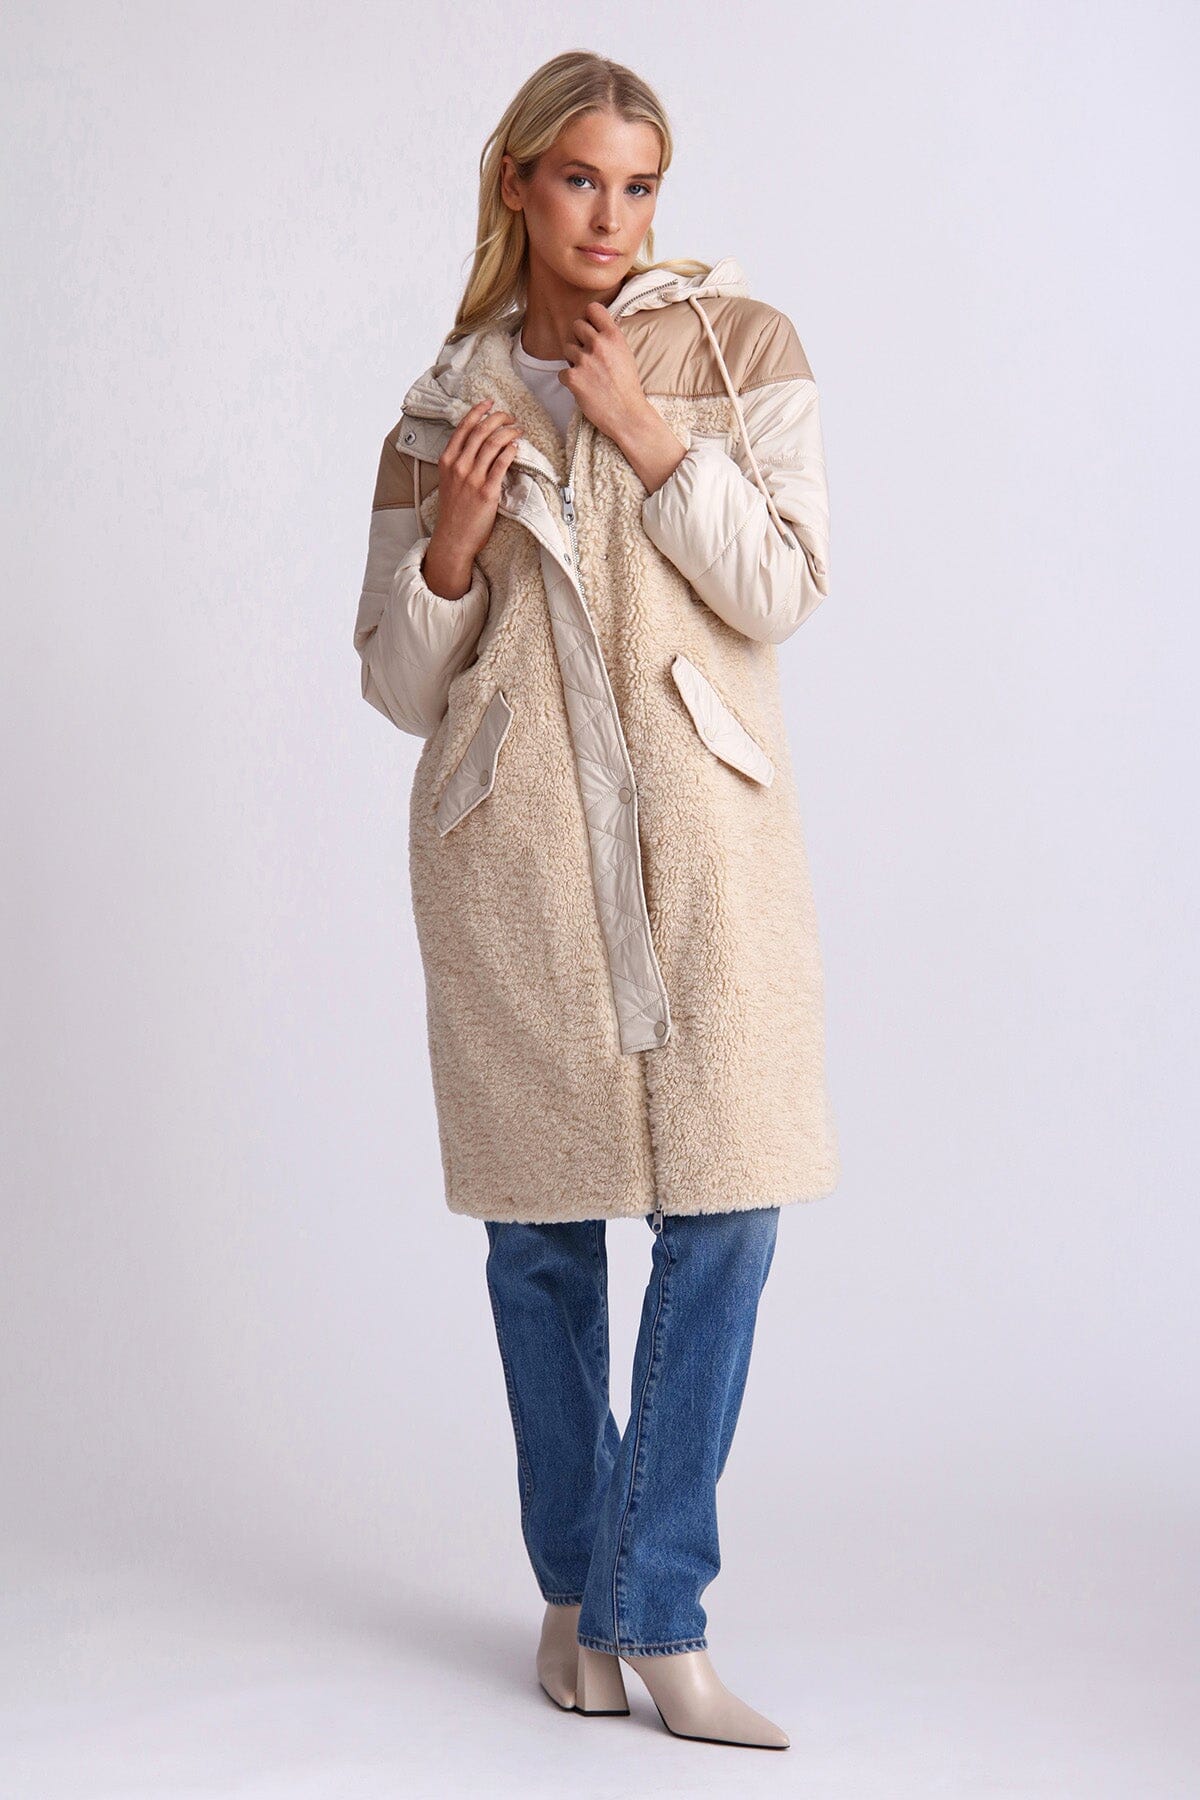 Oat beige faux fur quilted anorak long coat jacket - figure flattering day to night casual Fall 2023 outerwear for ladies